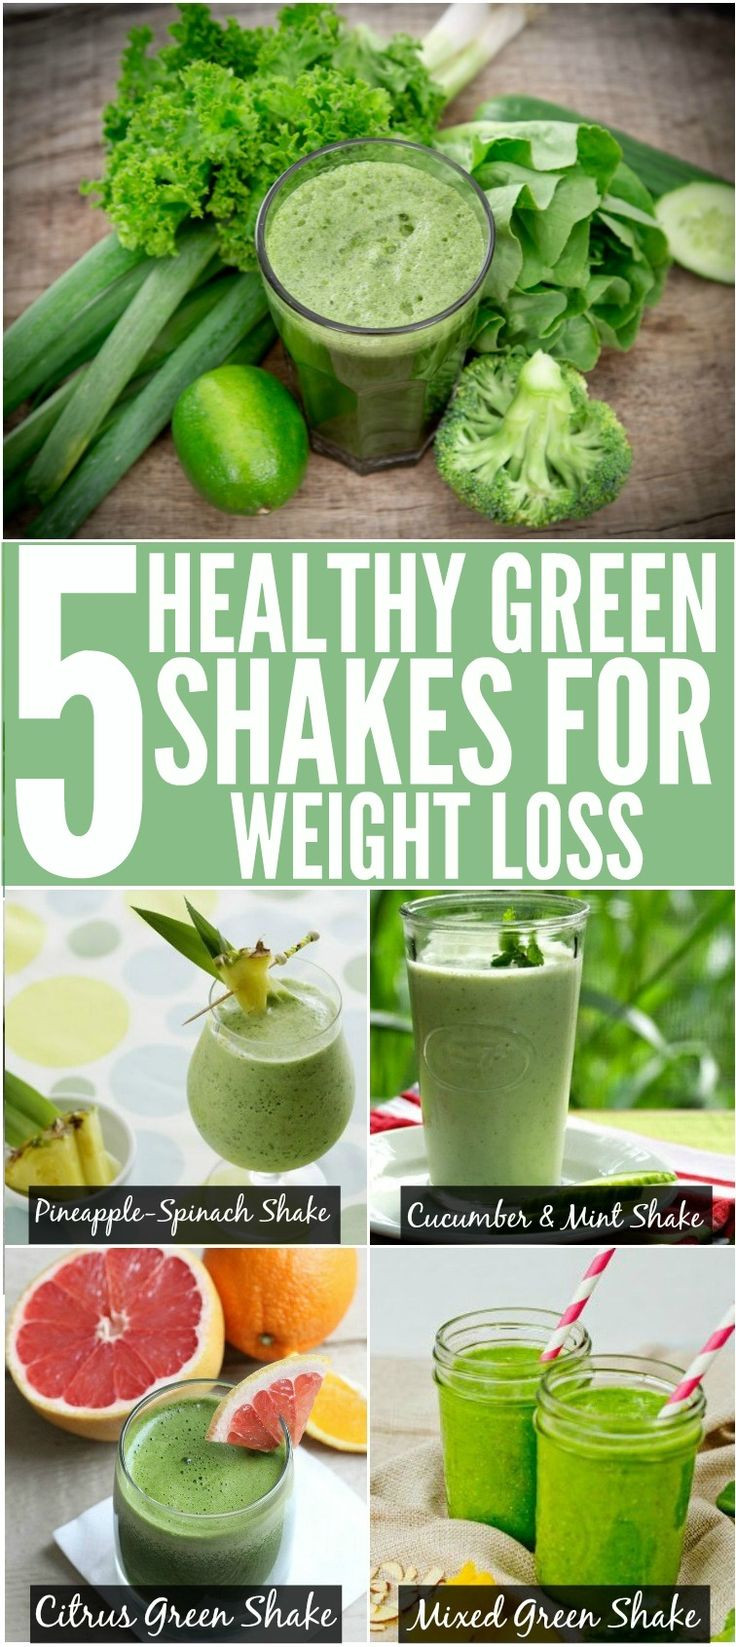 Healthy Shake Recipes For Weight Loss
 Healthy shakes to lose weight – Weight Loss Plans Keto No